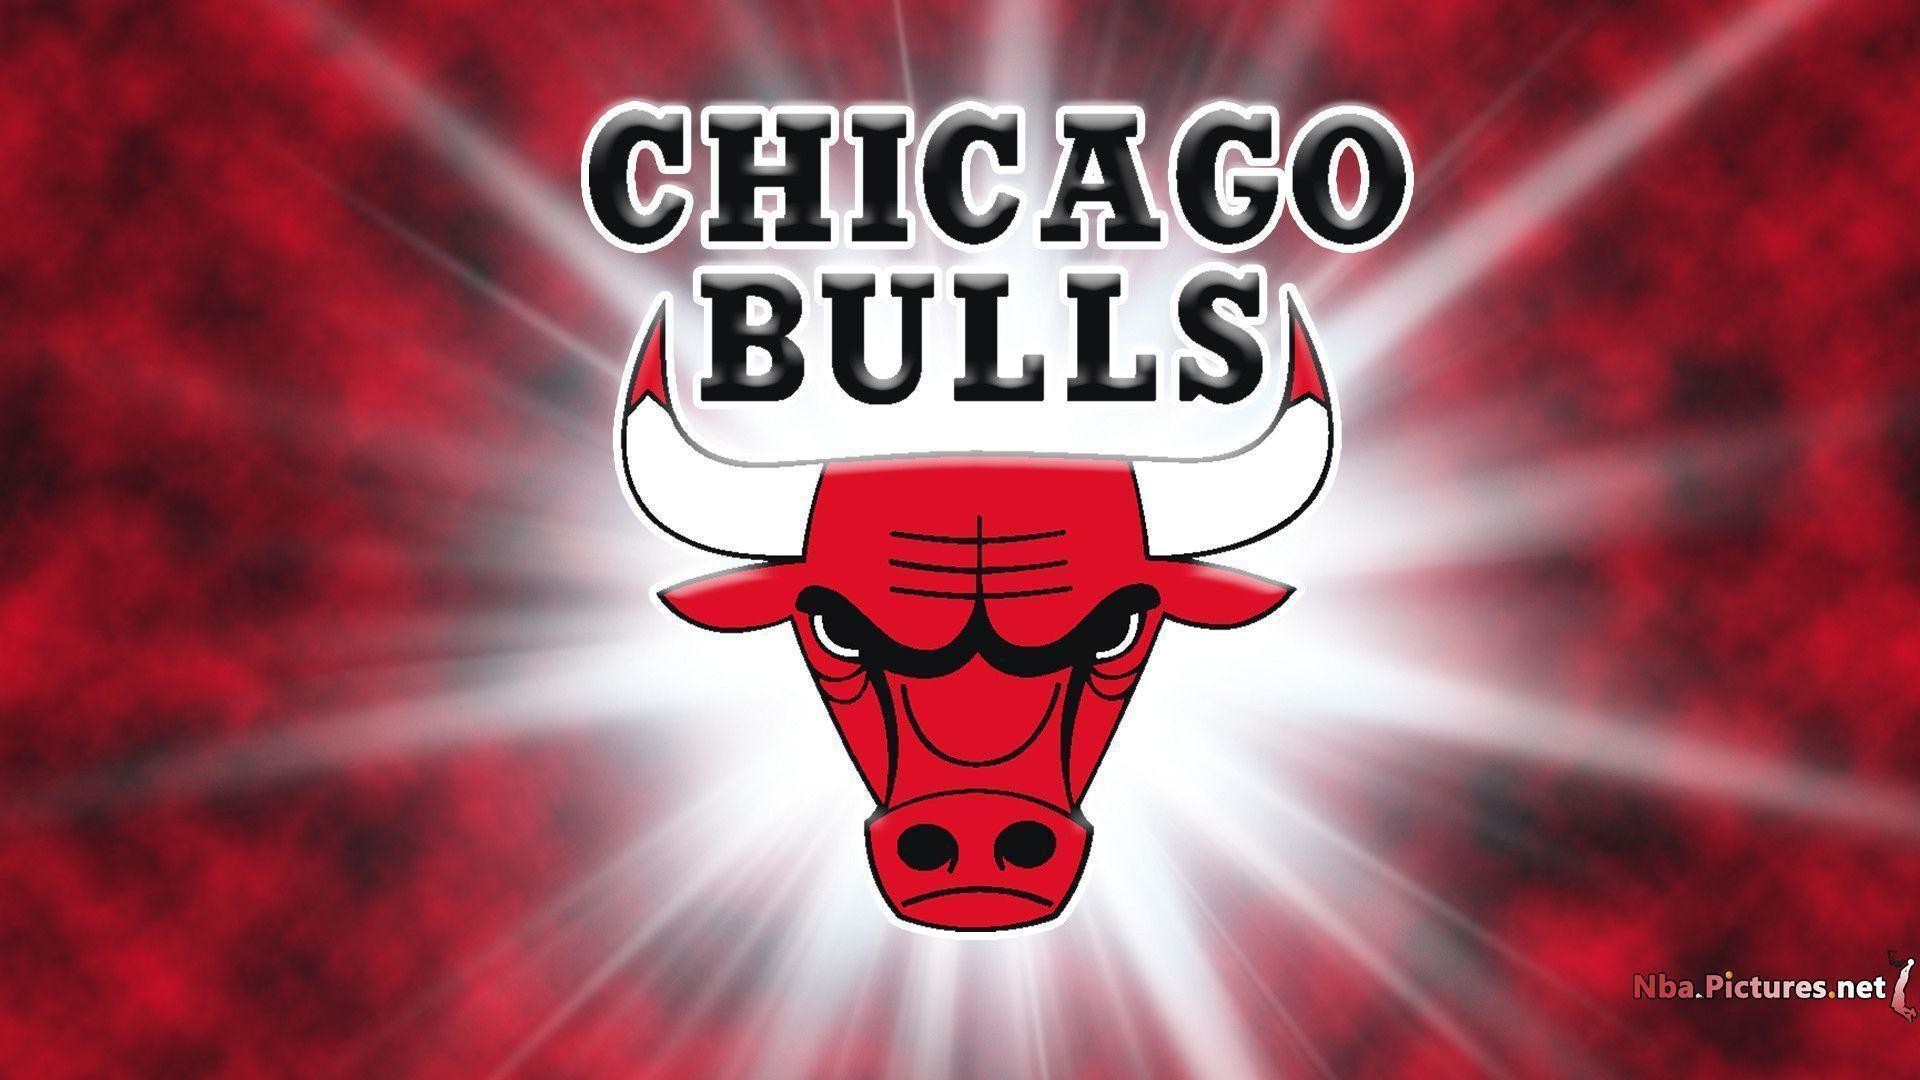 1920x1080 Images For > Chicago Bulls Wallpaper Hd 2014